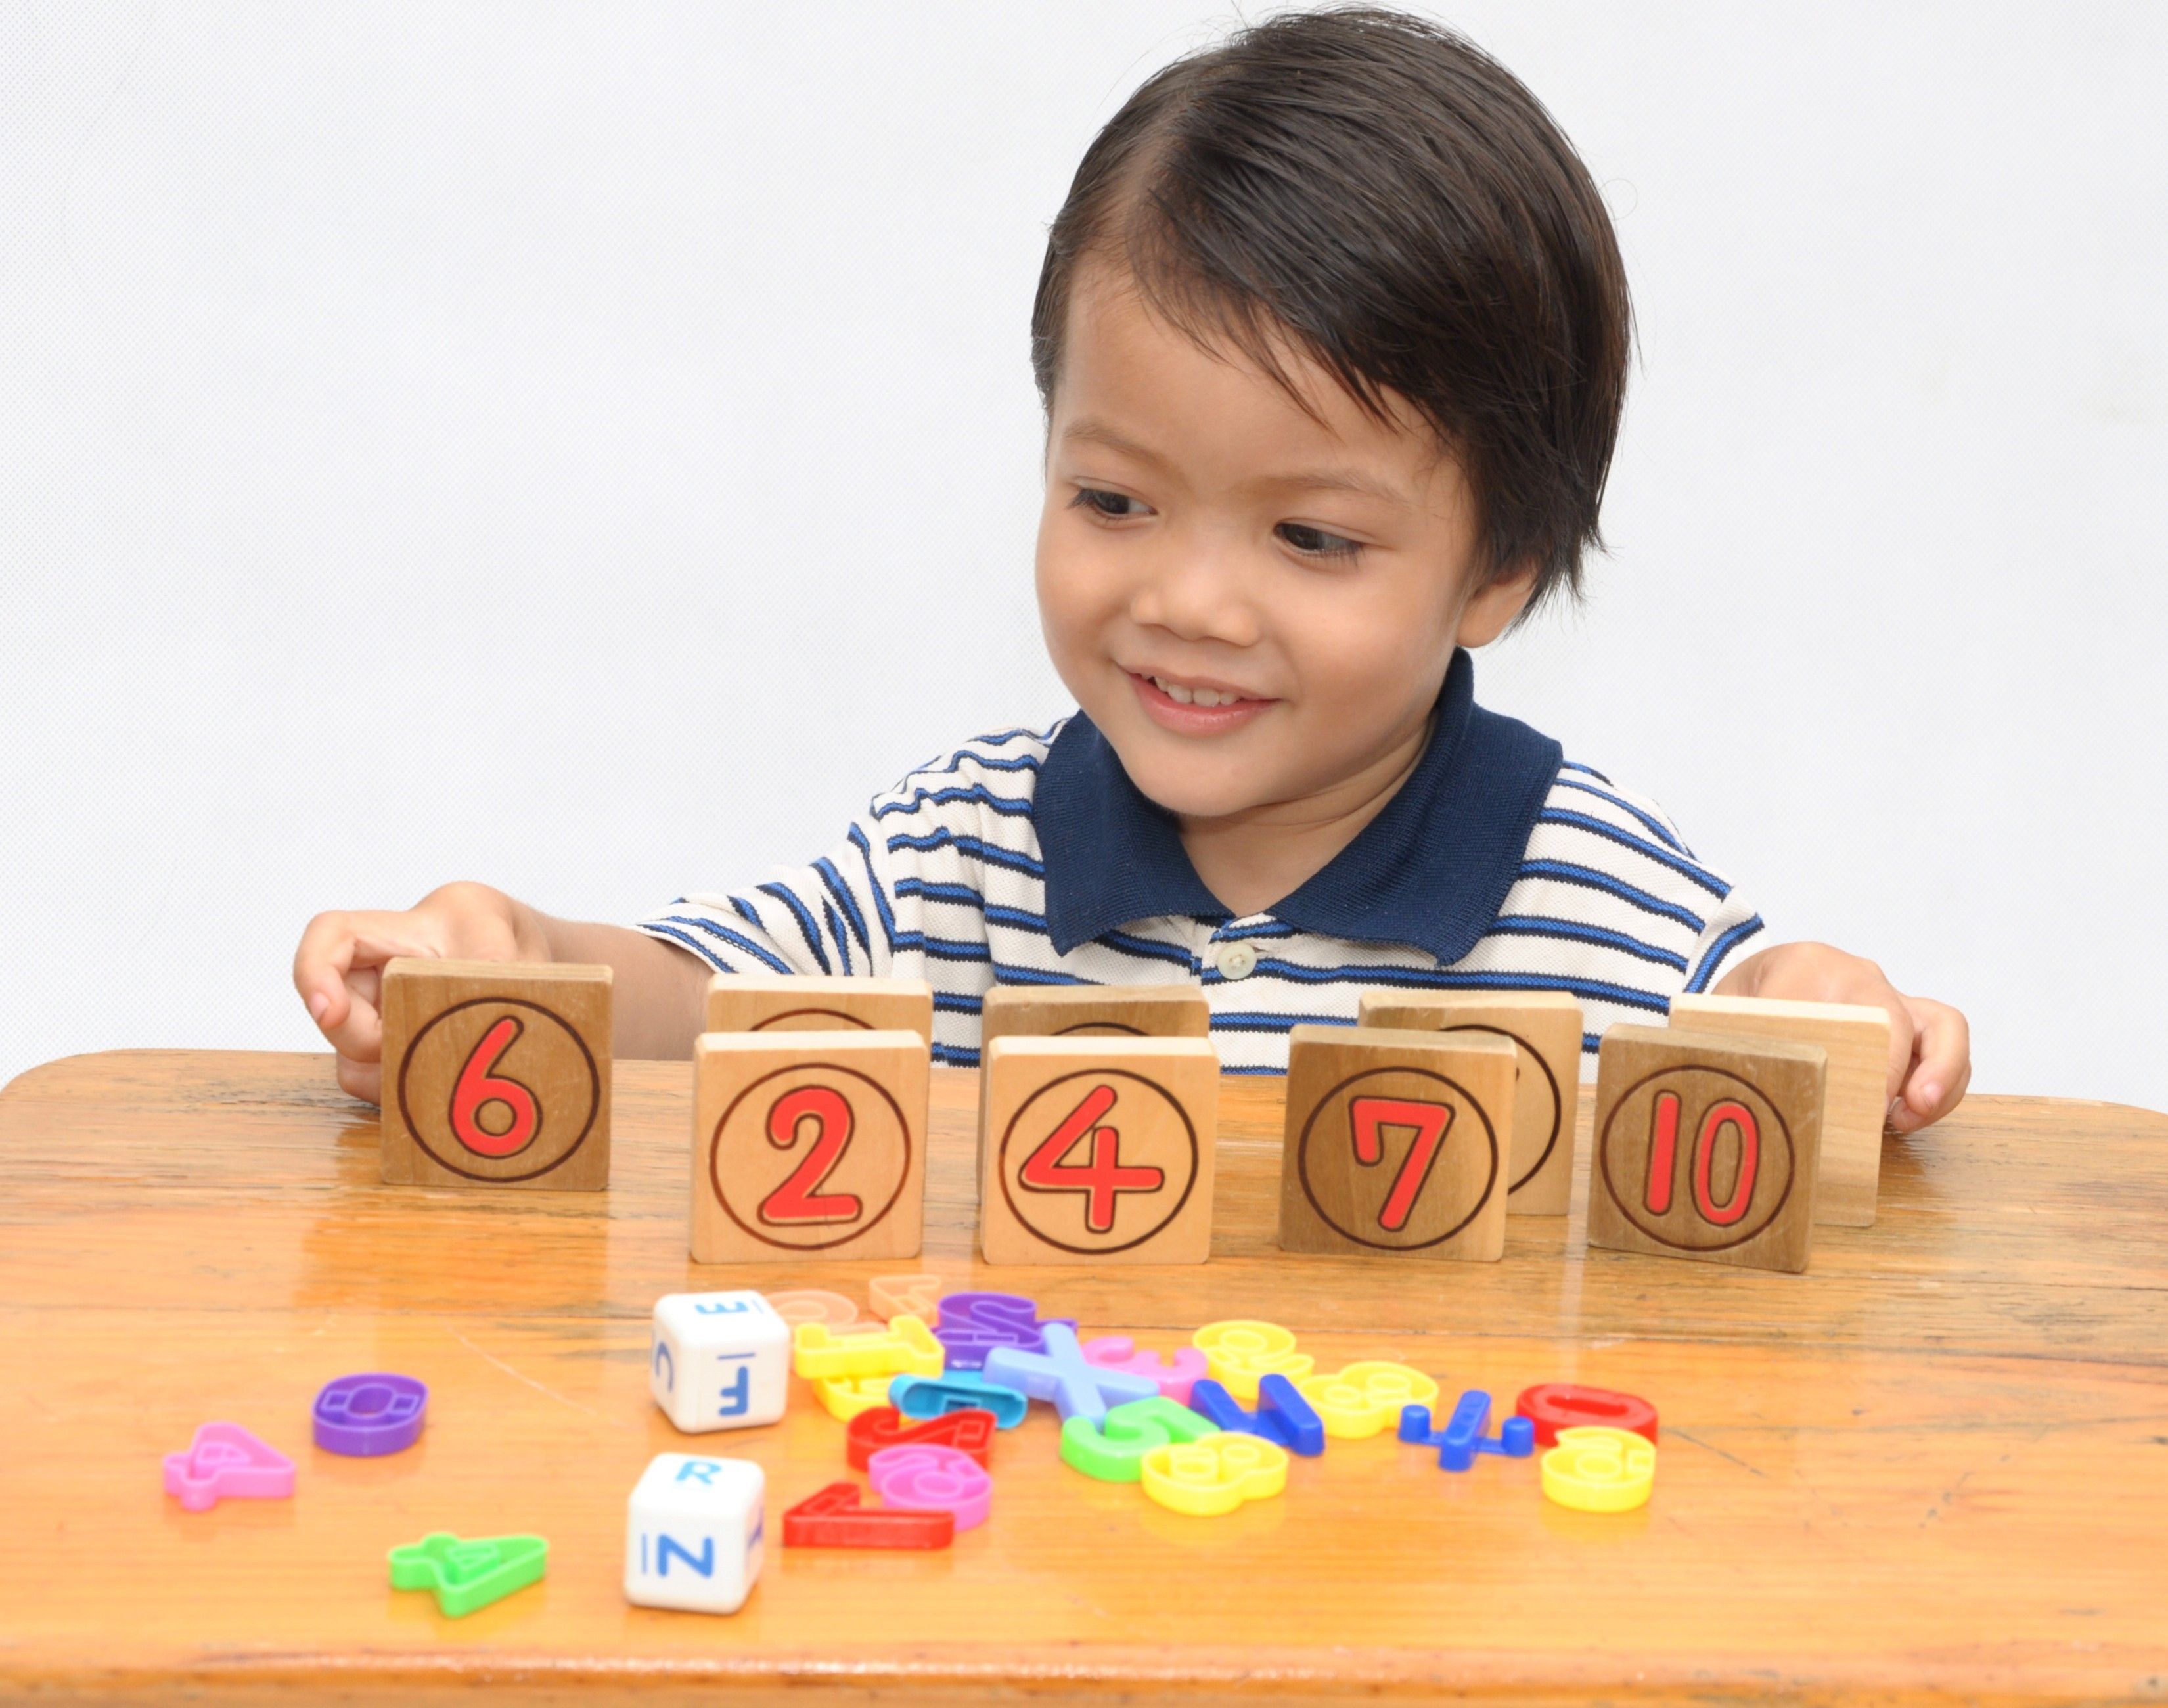 A young boy is learning numbers with colorful wooden blocks and plastic toys.